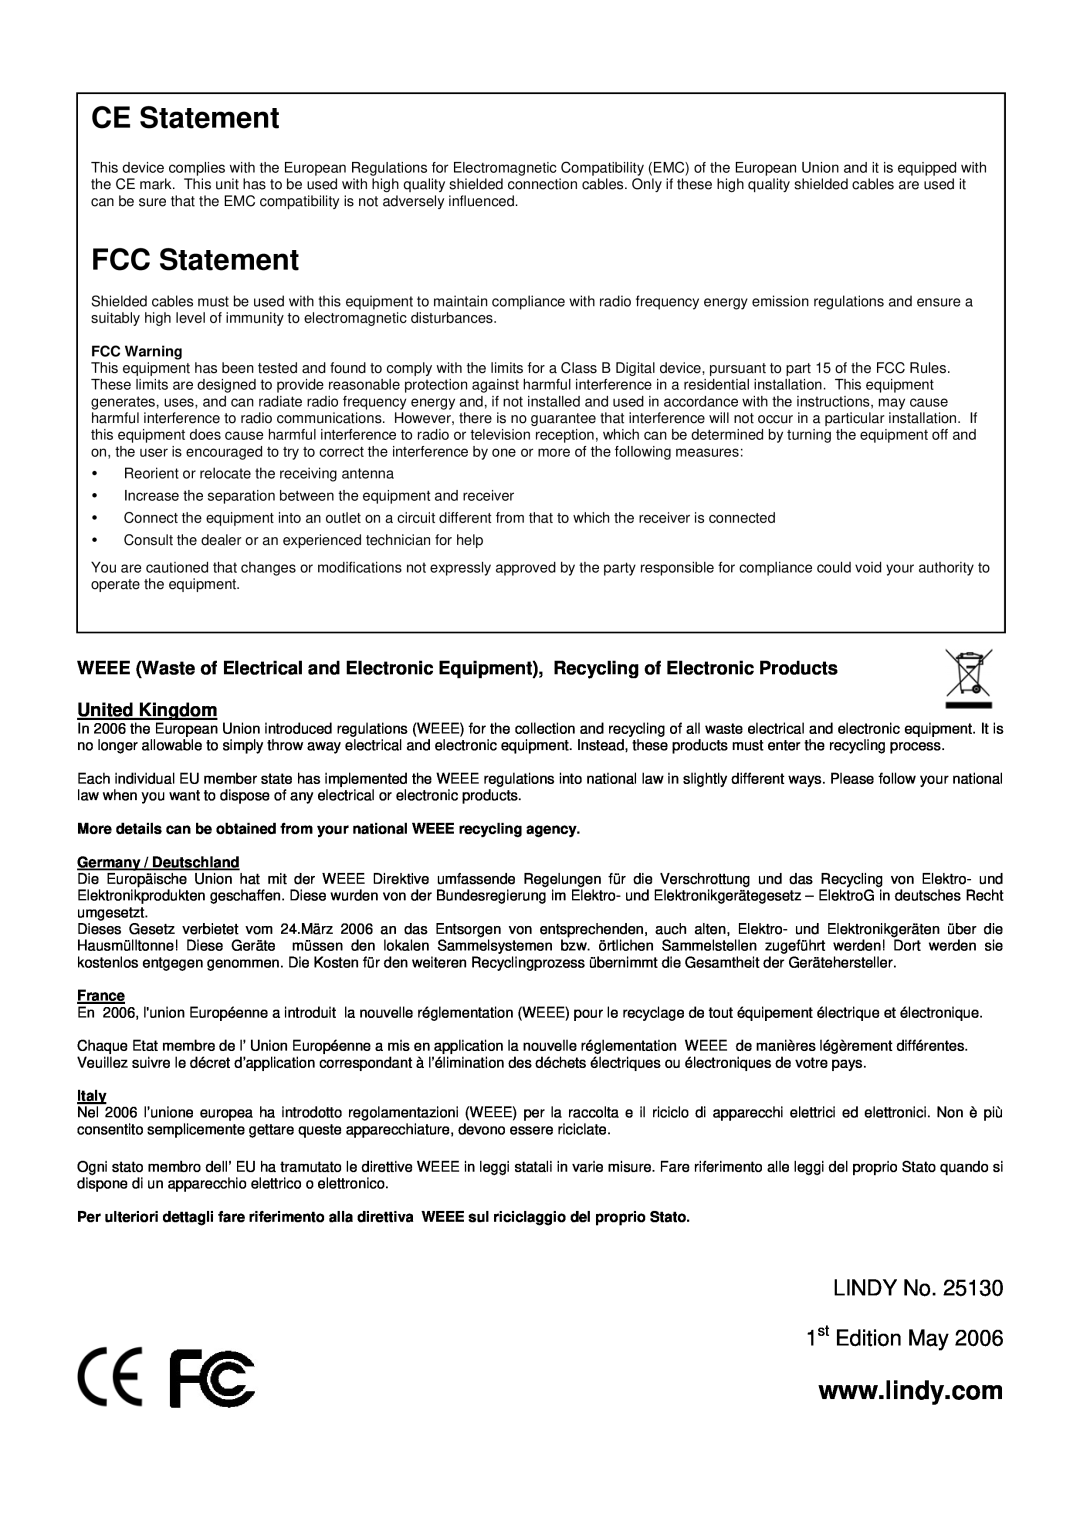 Lindy 25130 user manual CE Statement, FCC Statement, FCC Warning, Germany / Deutschland, France, Italy 